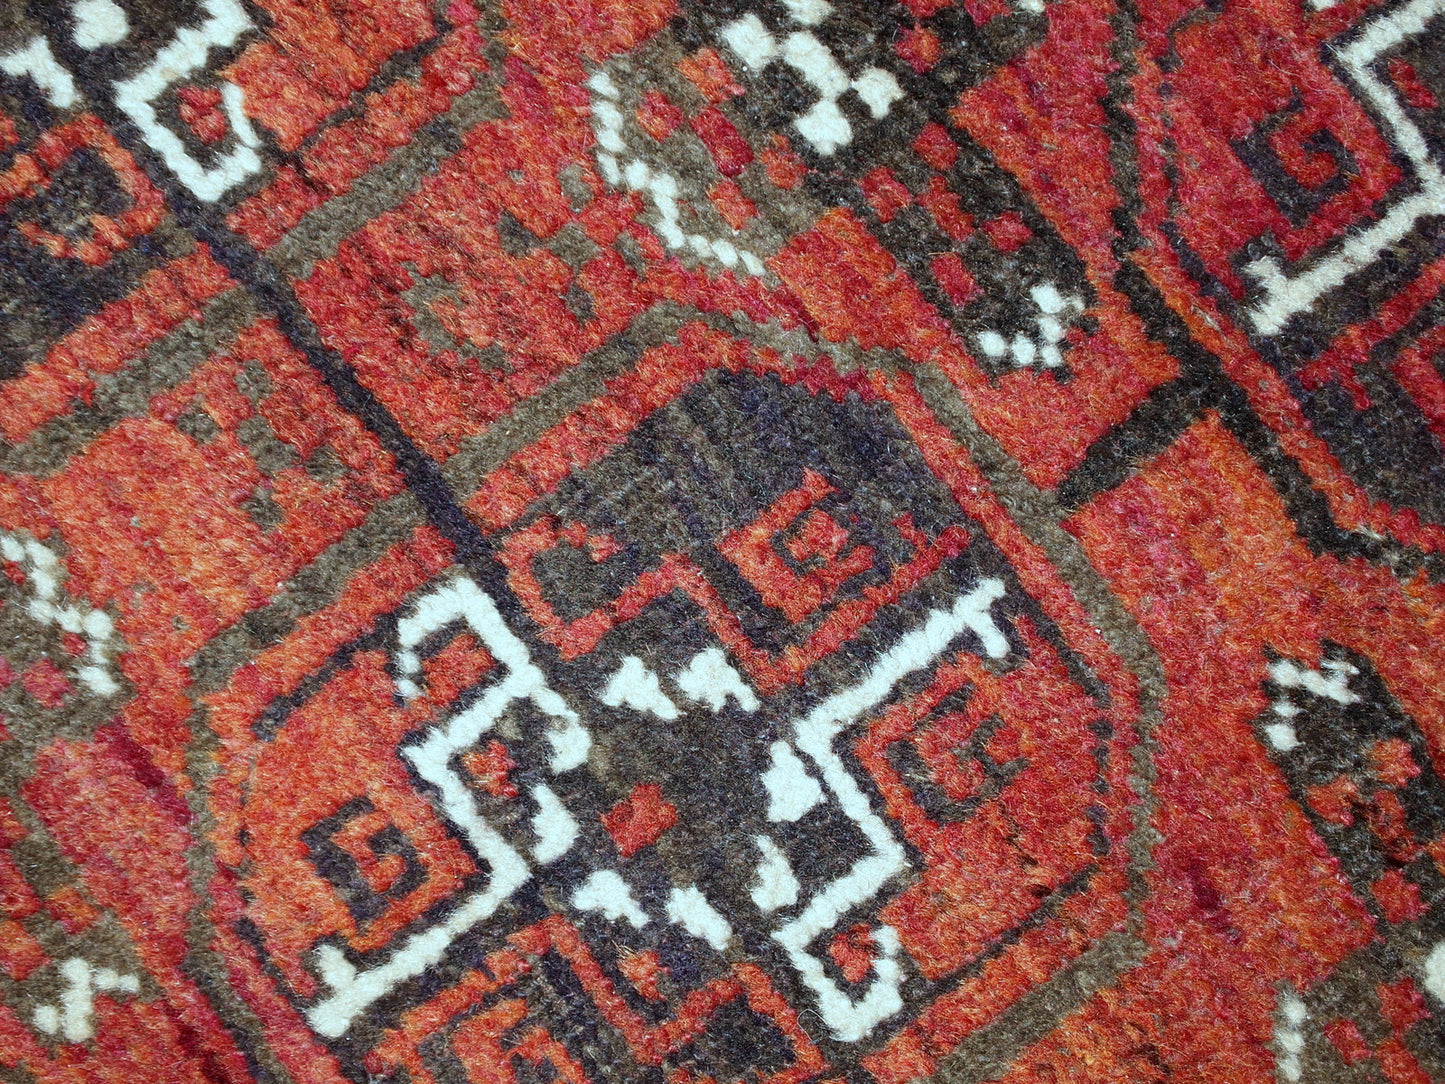 Antique hand made Afghan Baluch rug in original good condition. This rug is in brick red shade with repeating design.